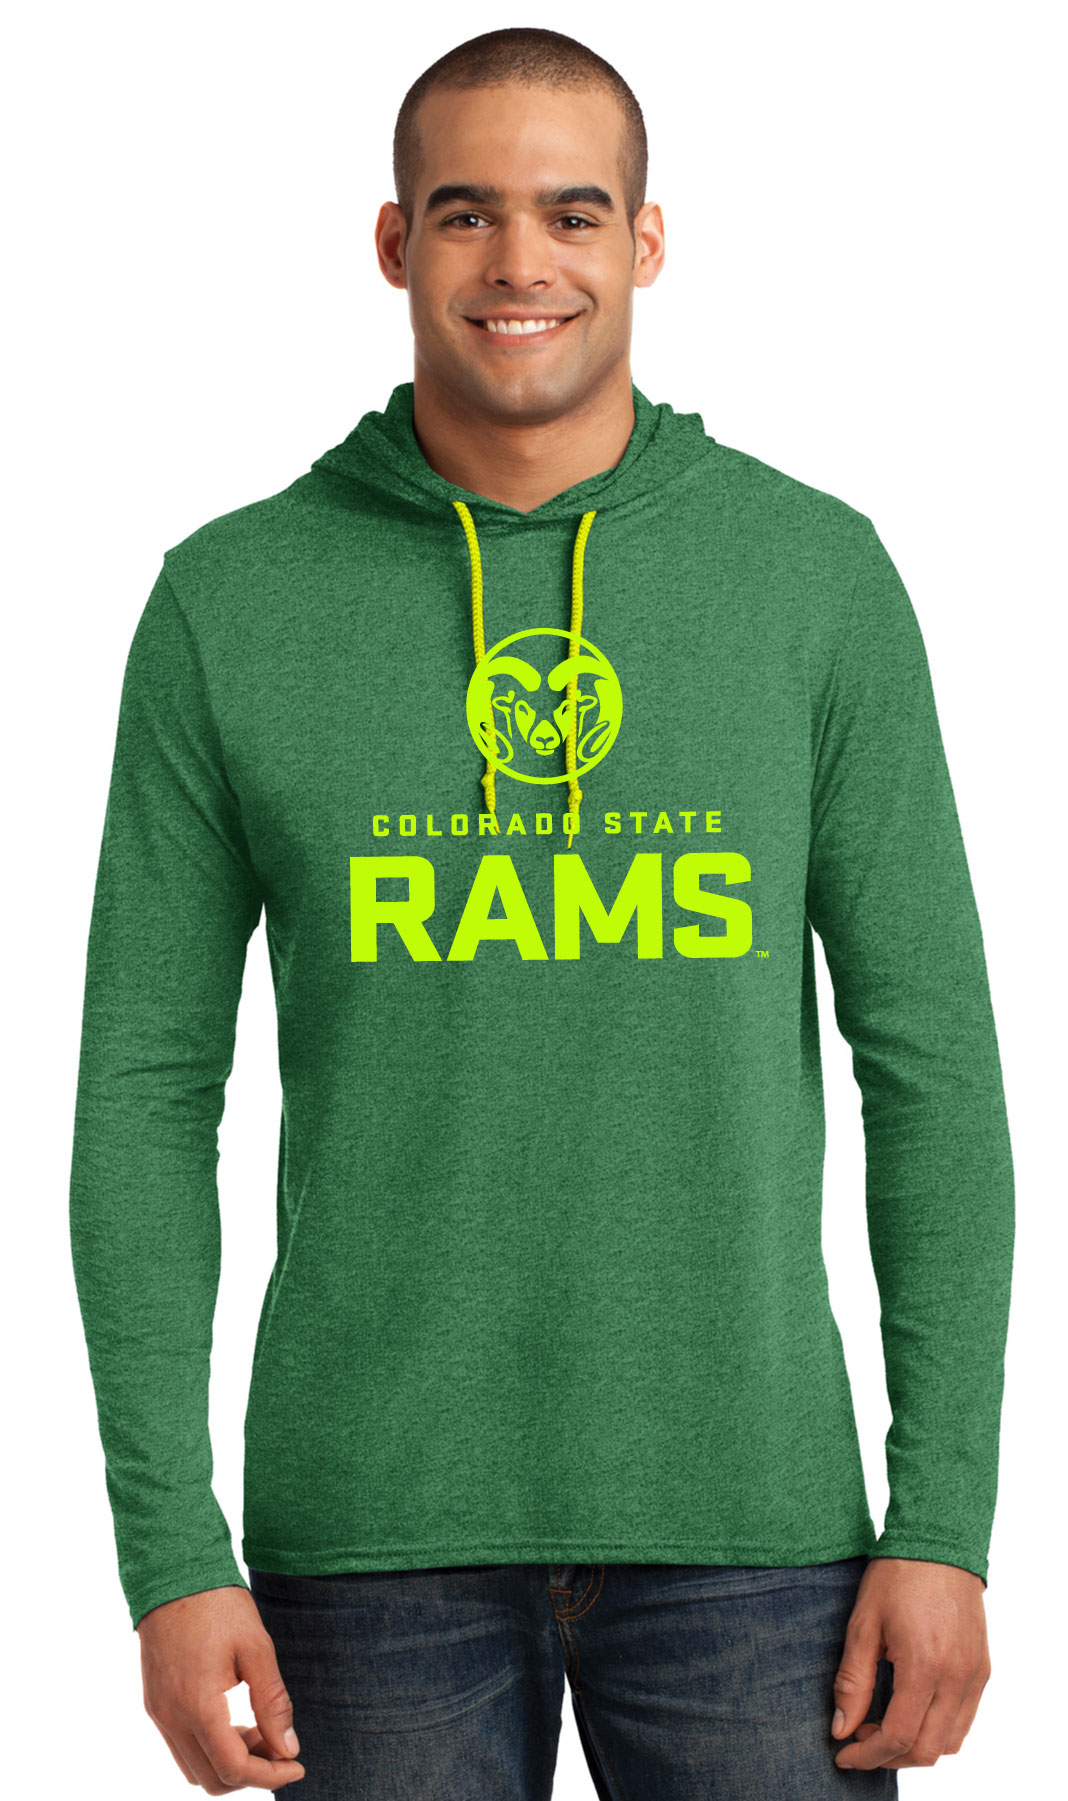 COLORADO STATE RAMS ADULT GREEN EMBROIDERED V-NOTCH CREW SWEATSHIRT NWT 